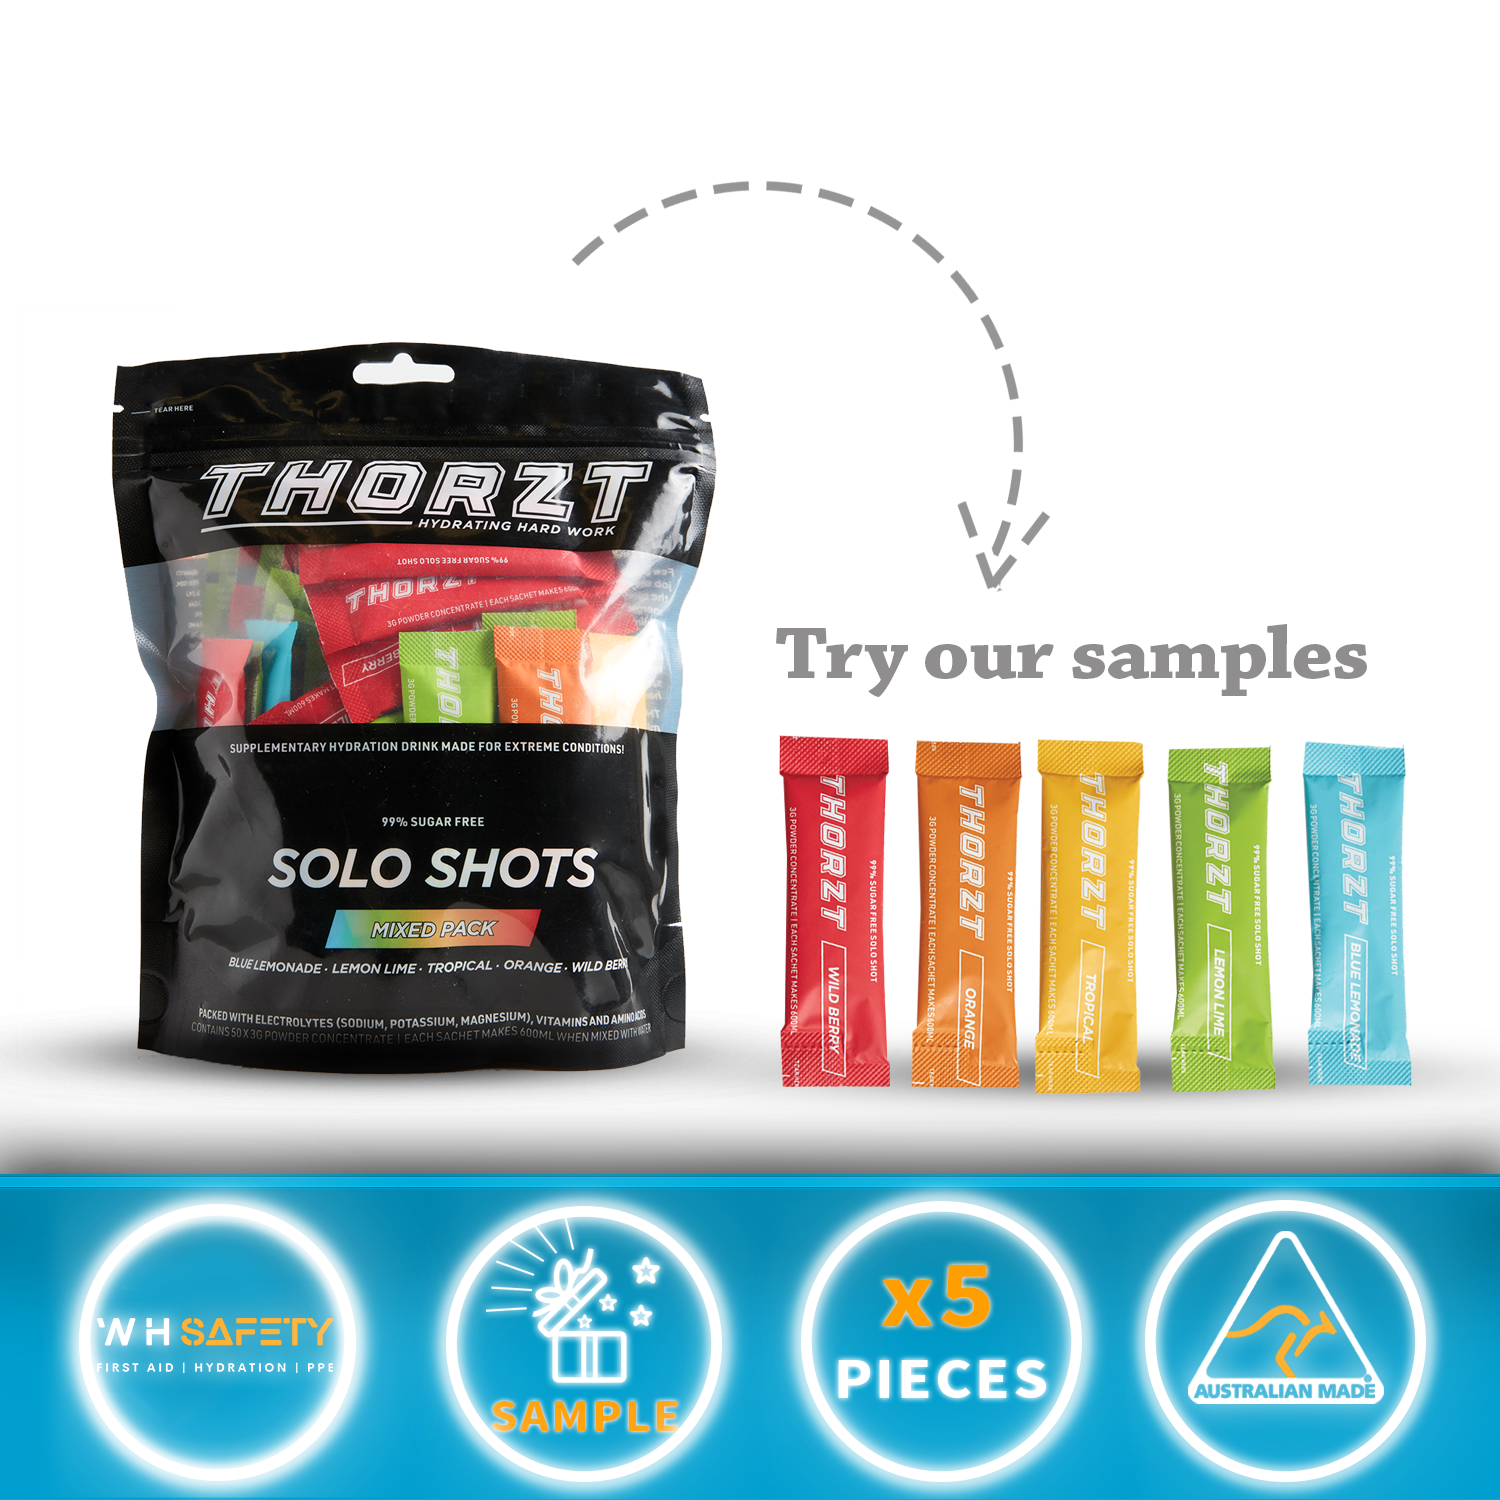 5x Thorzt Sample Sachets - Mixed Flavours - WHSAFETY